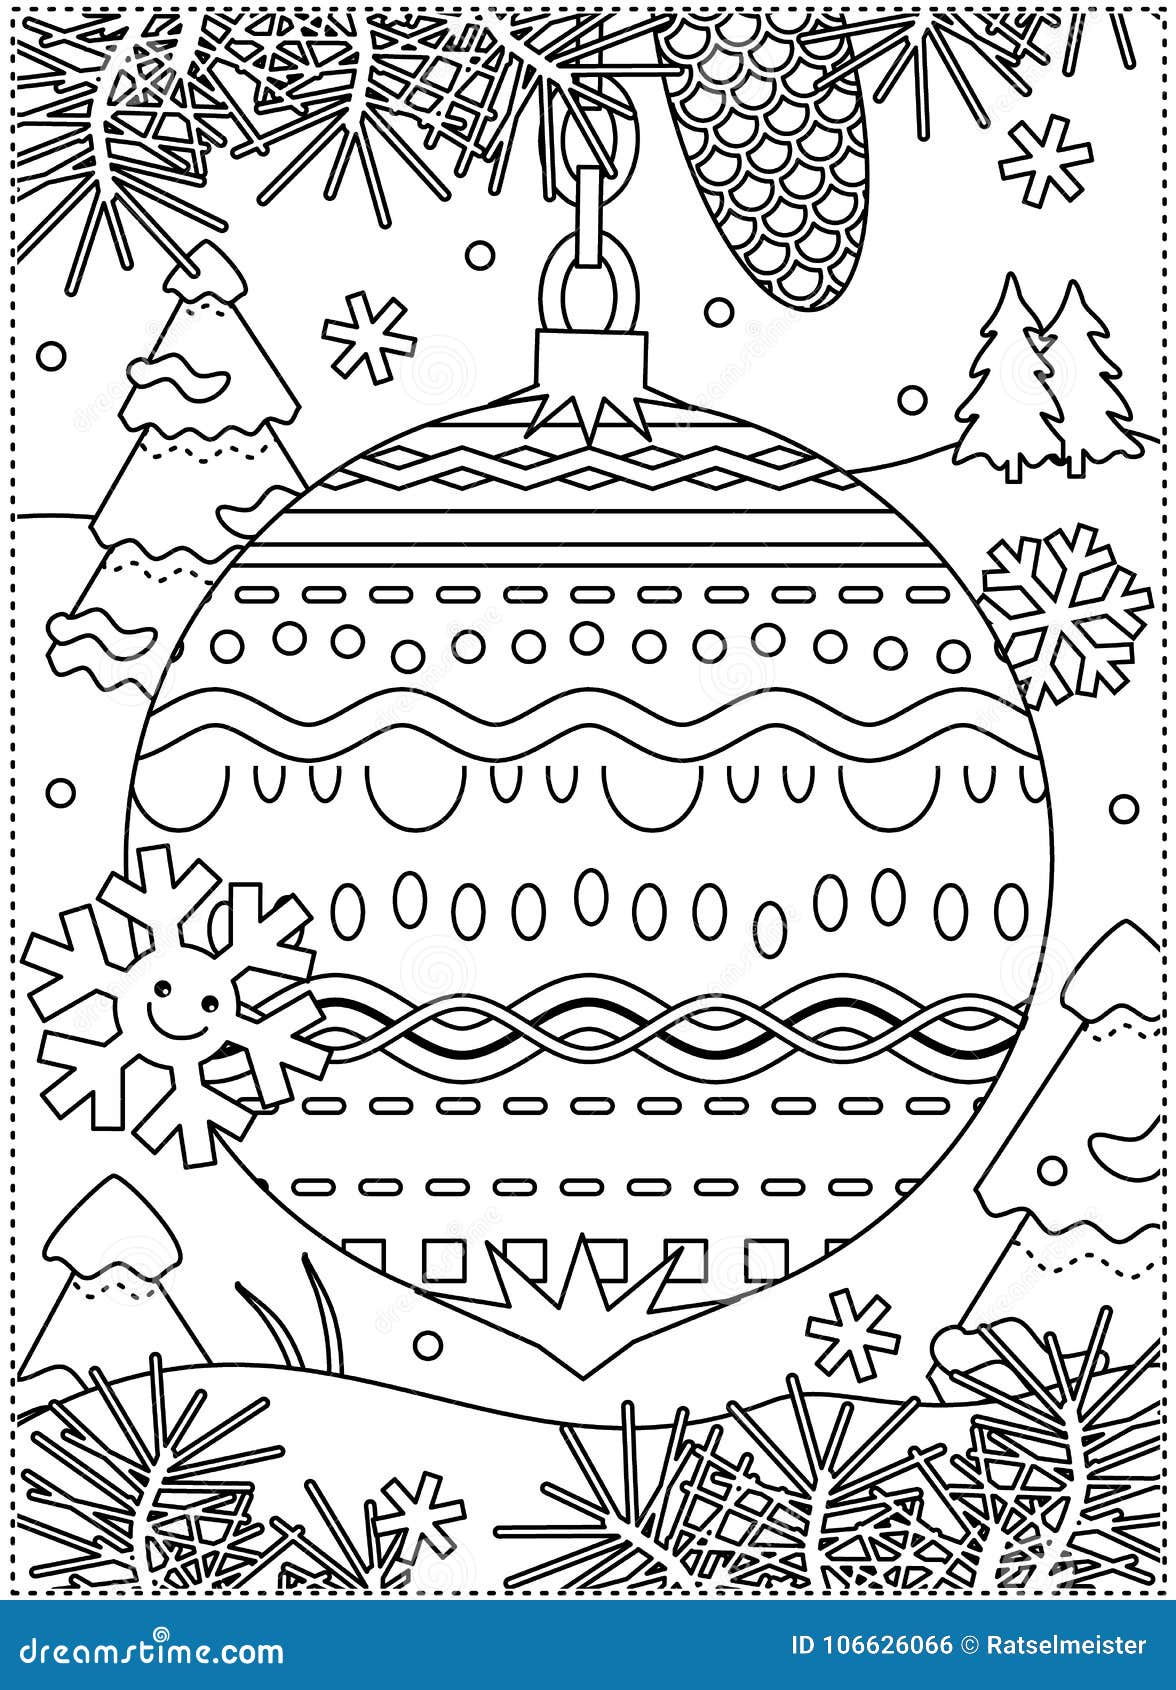 Winter holidays coloring page with decorated ornament stock vector